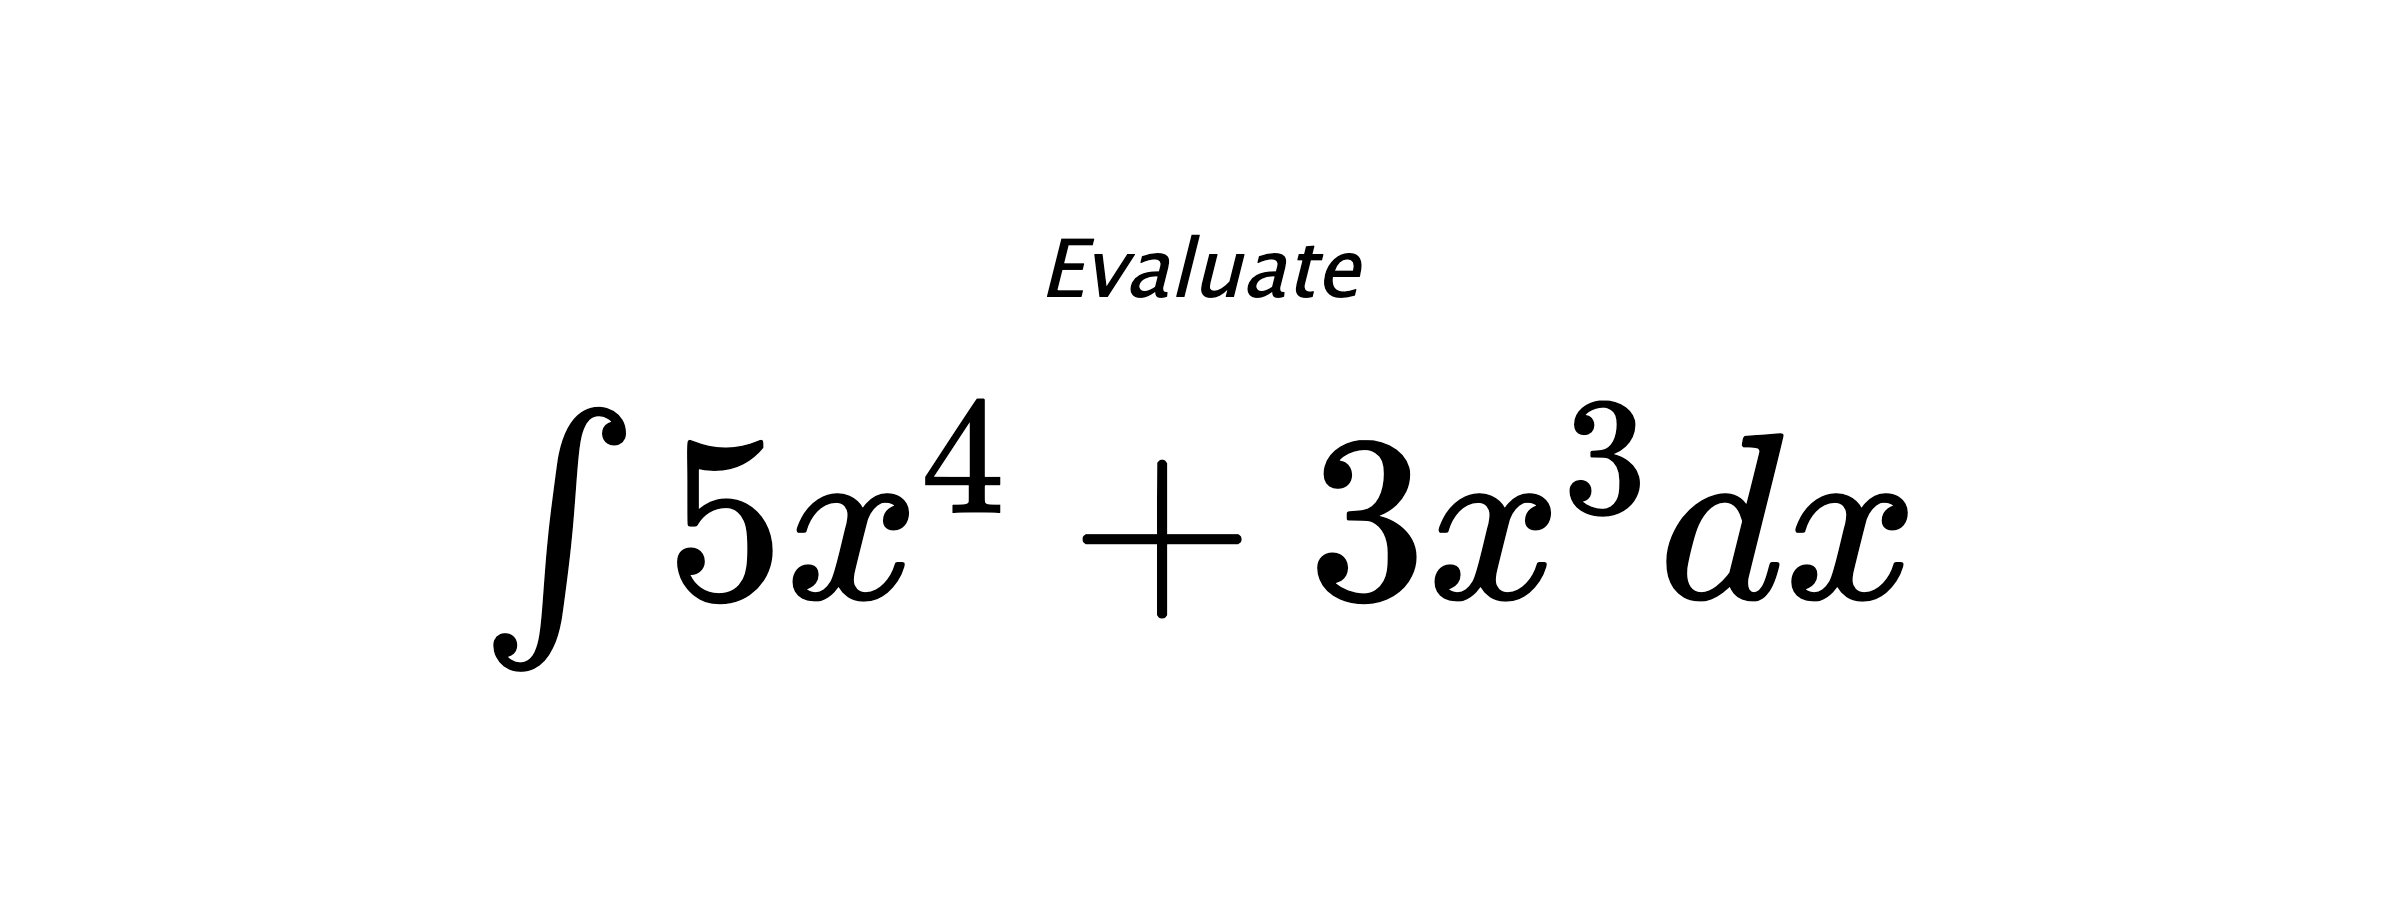 Evaluate $ \int 5 x^{4} + 3 x^{3} dx $